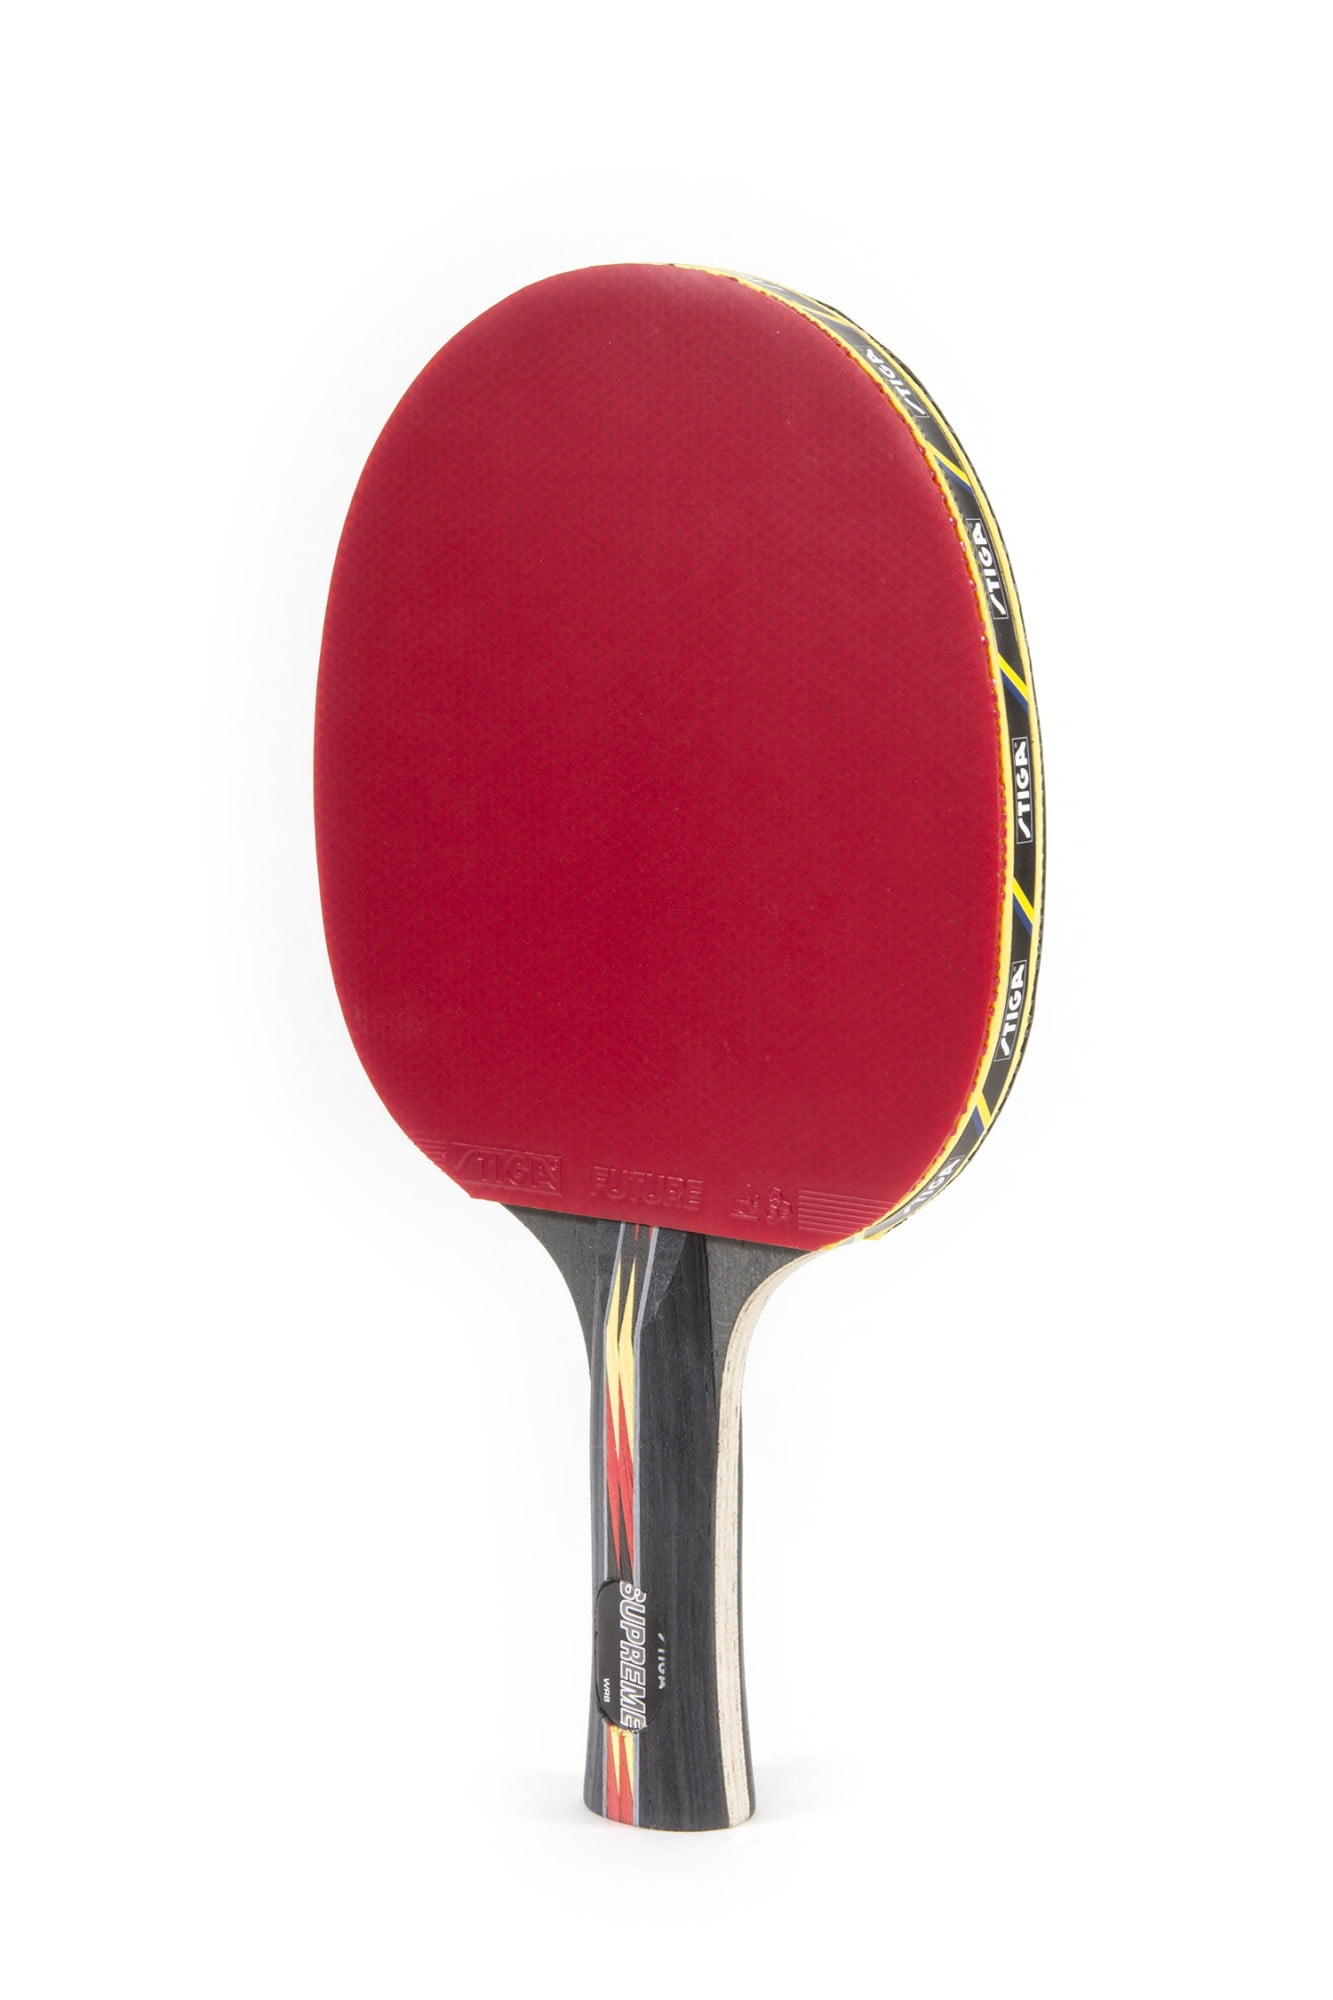 STIGA EVOLUTION Performance-Level Table Tennis Racket w/ Approved Rubber 